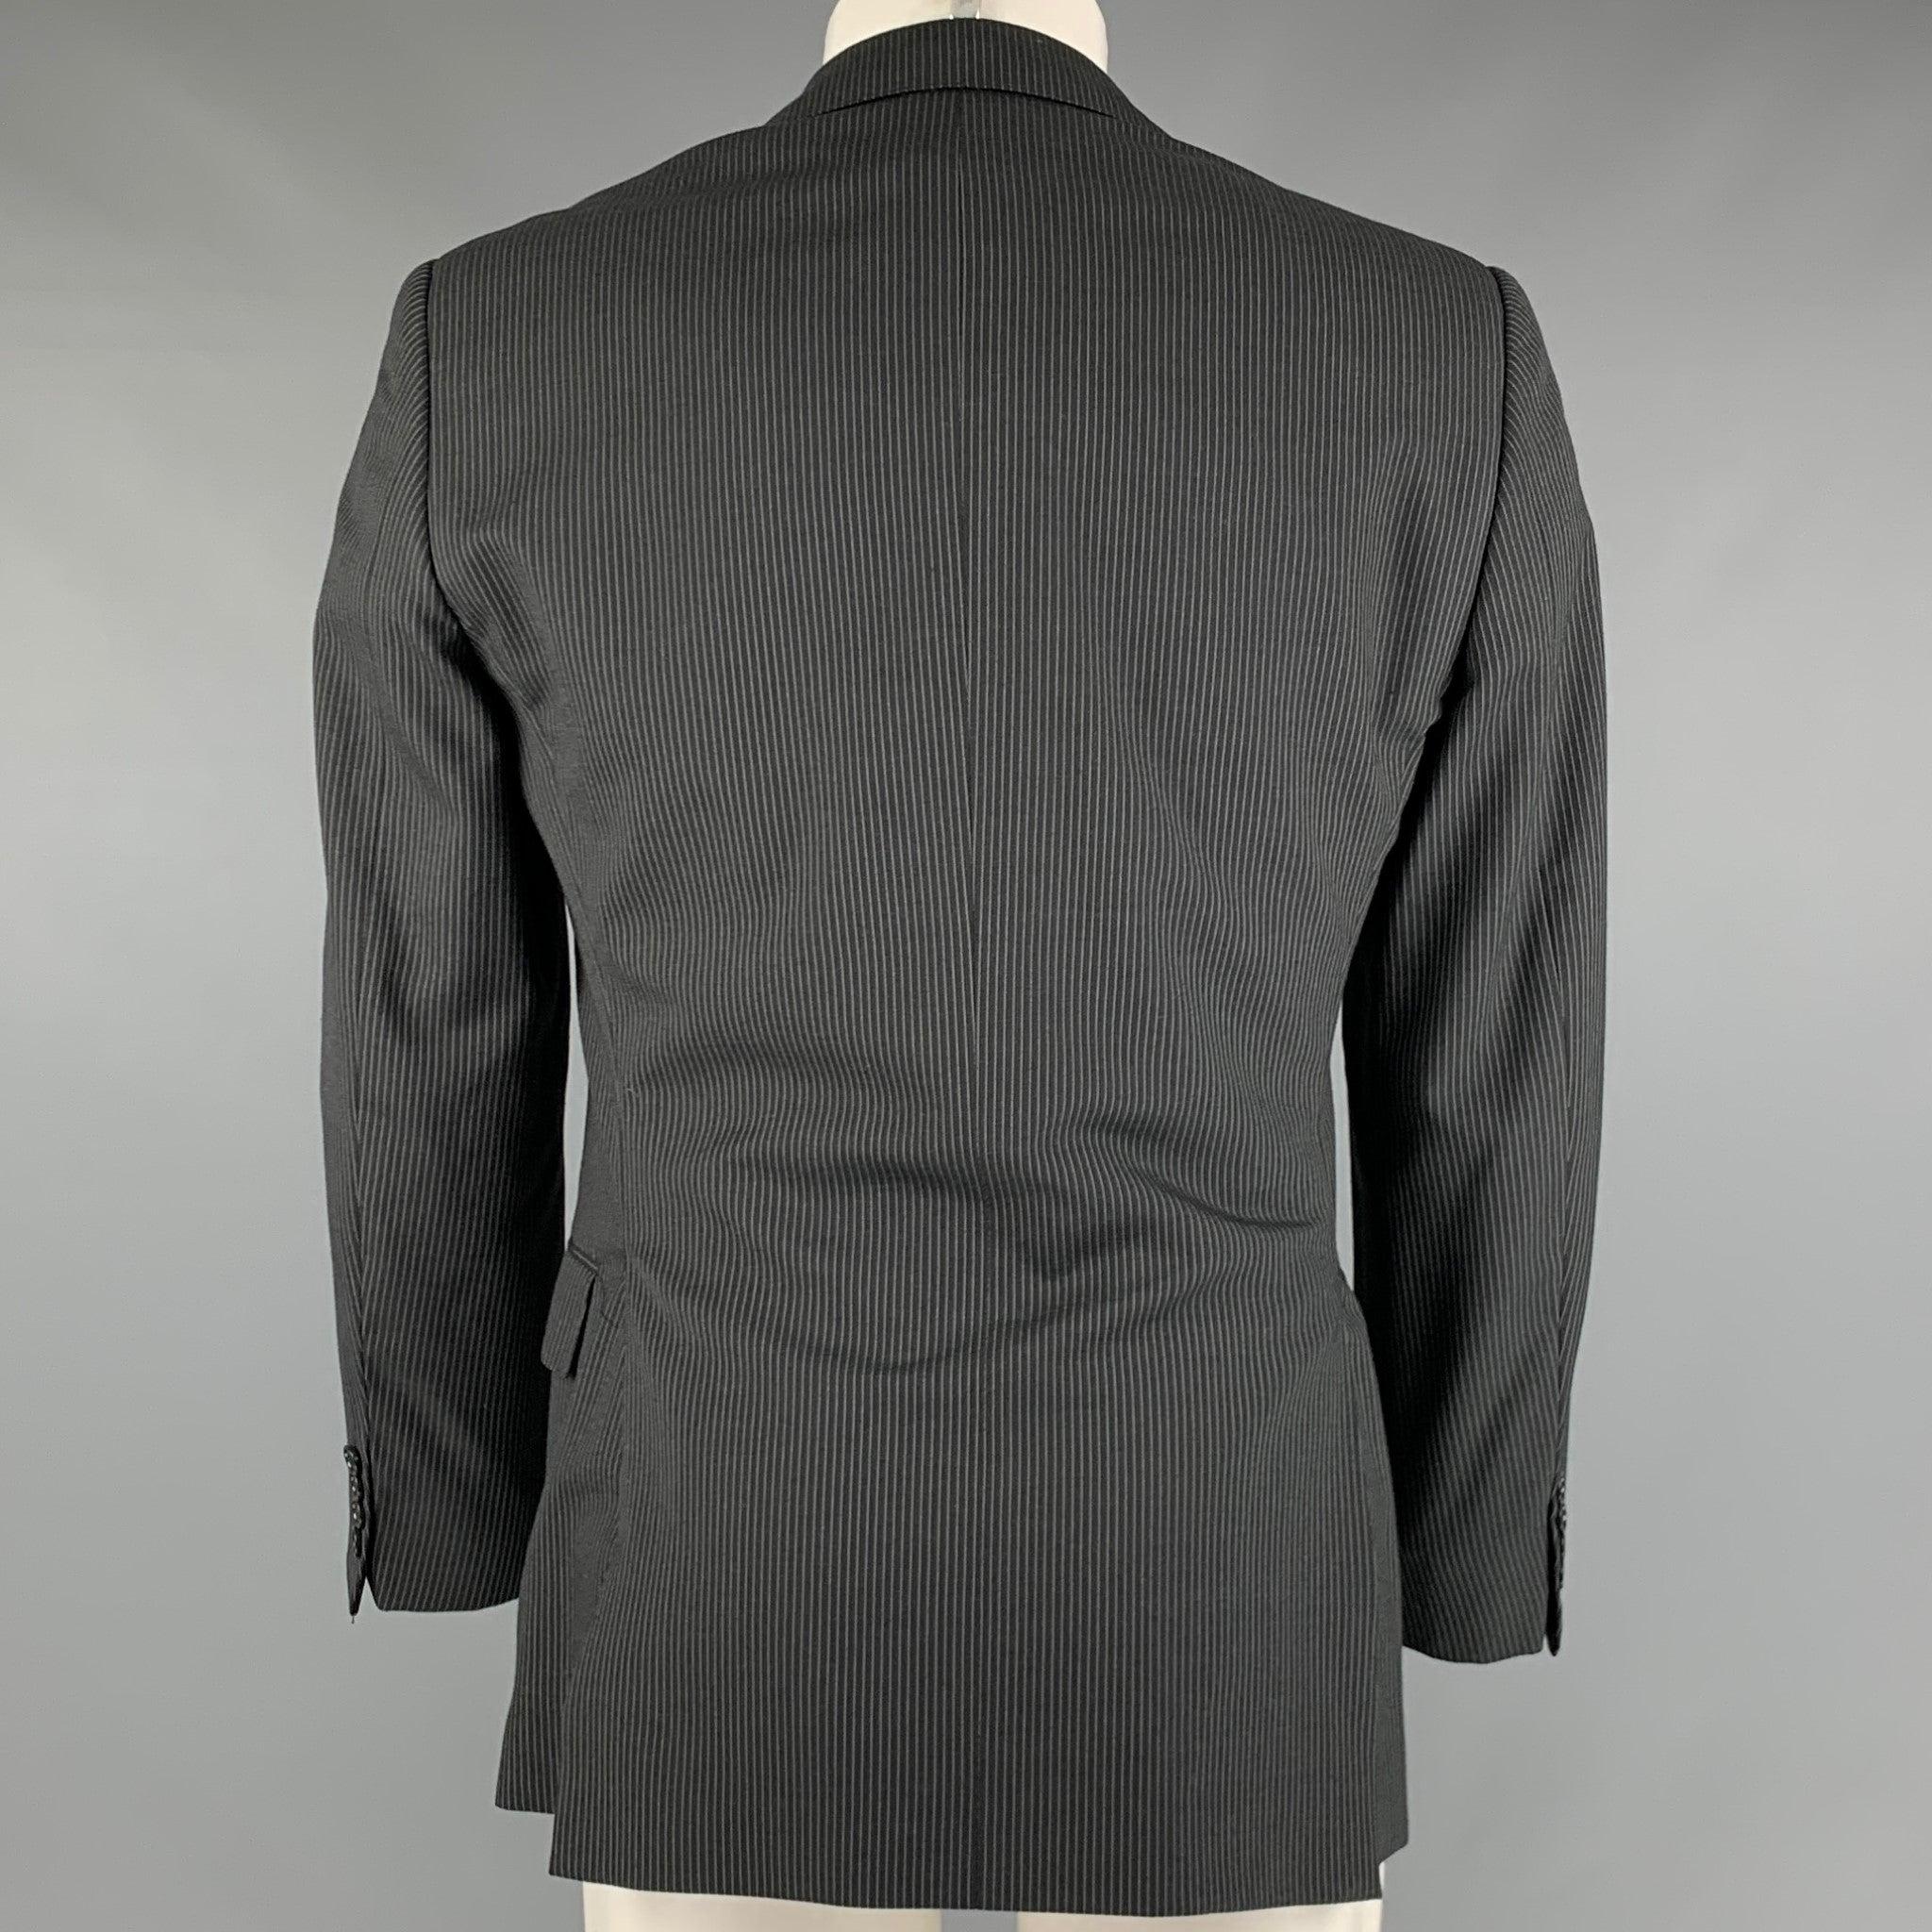 RALPH LAUREN Size 38 Black Grey Pinstripe Wool Single Breasted Sport Coat In Good Condition For Sale In San Francisco, CA